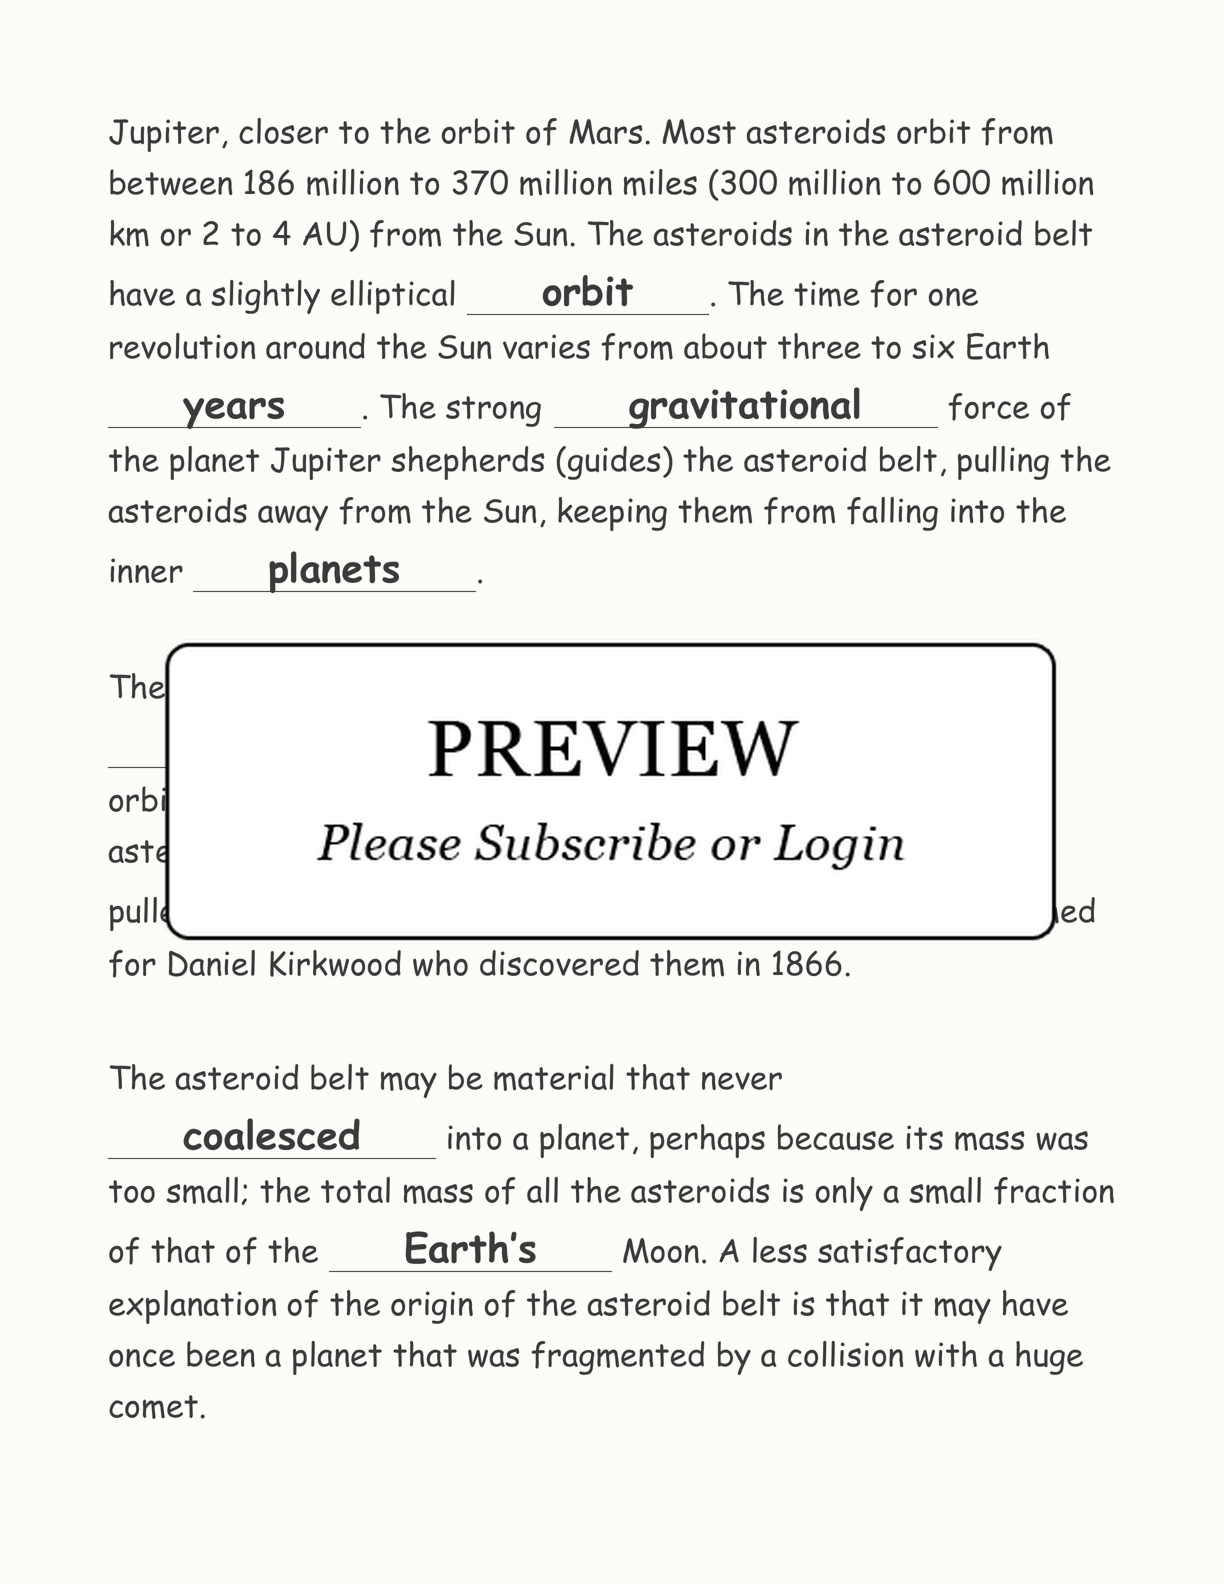 Asteroid Cloze Activity interactive worksheet page 5